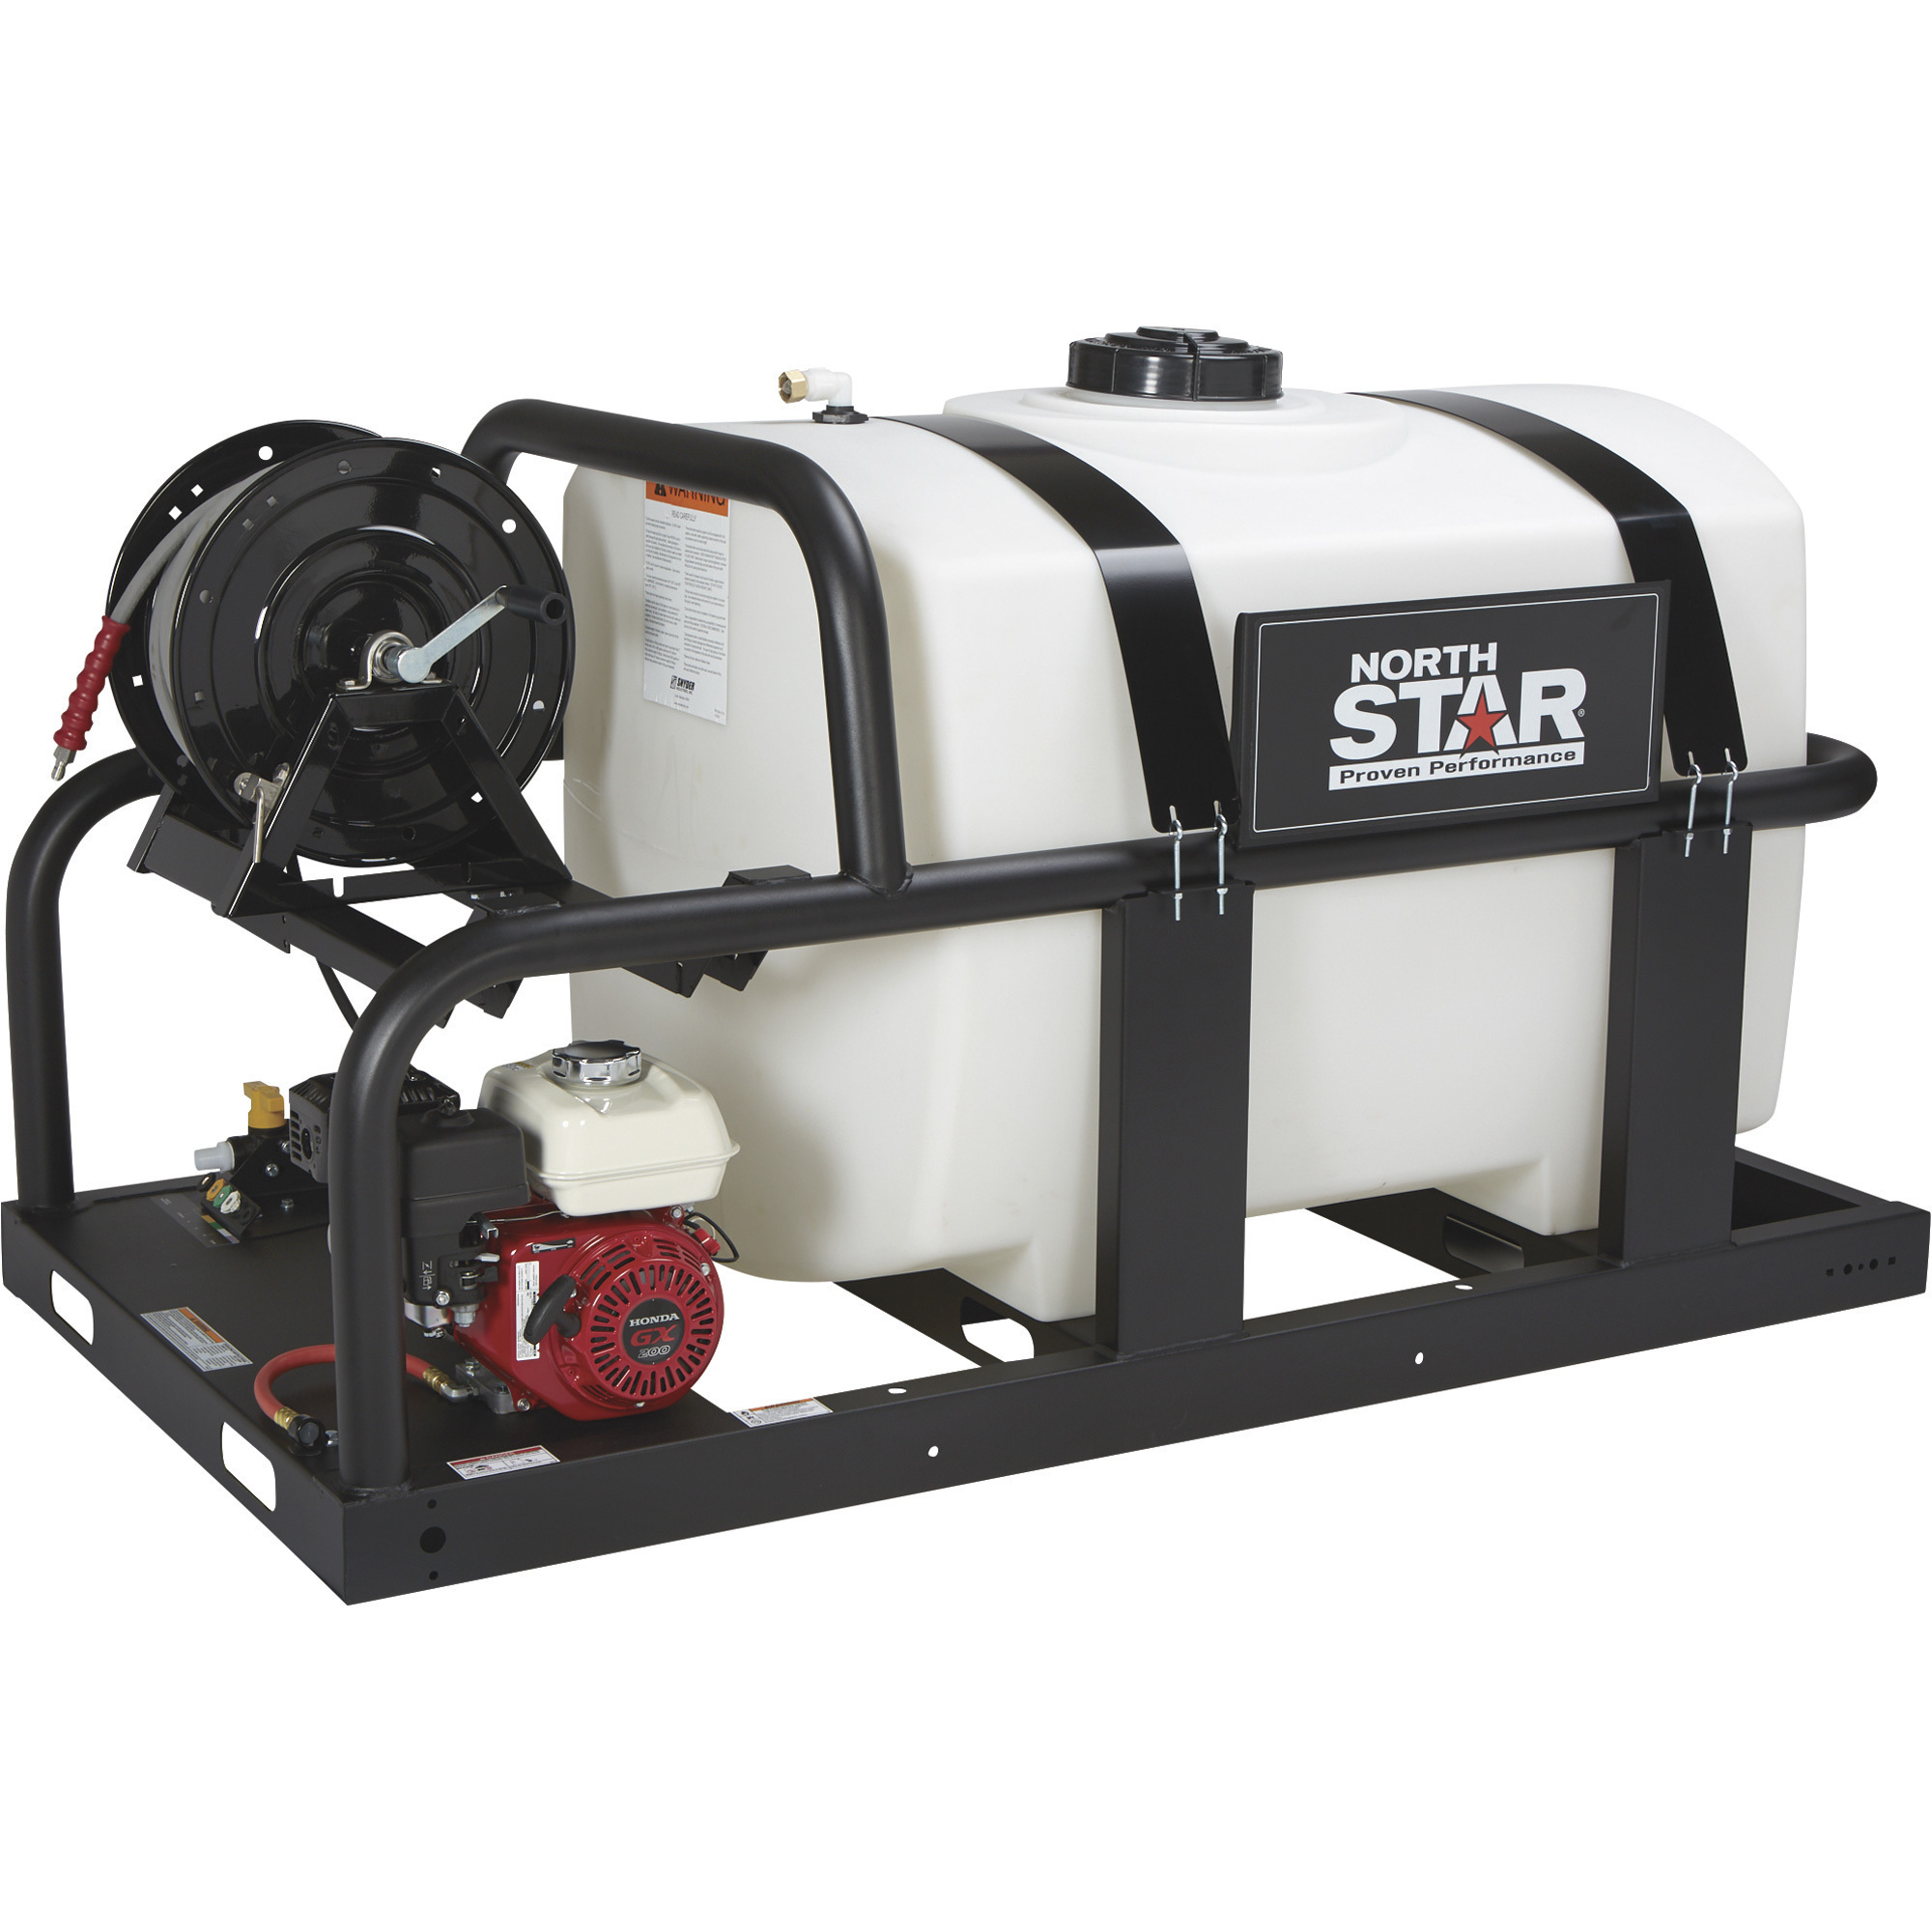 NorthStar 2000 PSI, 3.5 GPM Cold Water Pressure Washer Skid with 200-Gal. Tank â Honda Engine